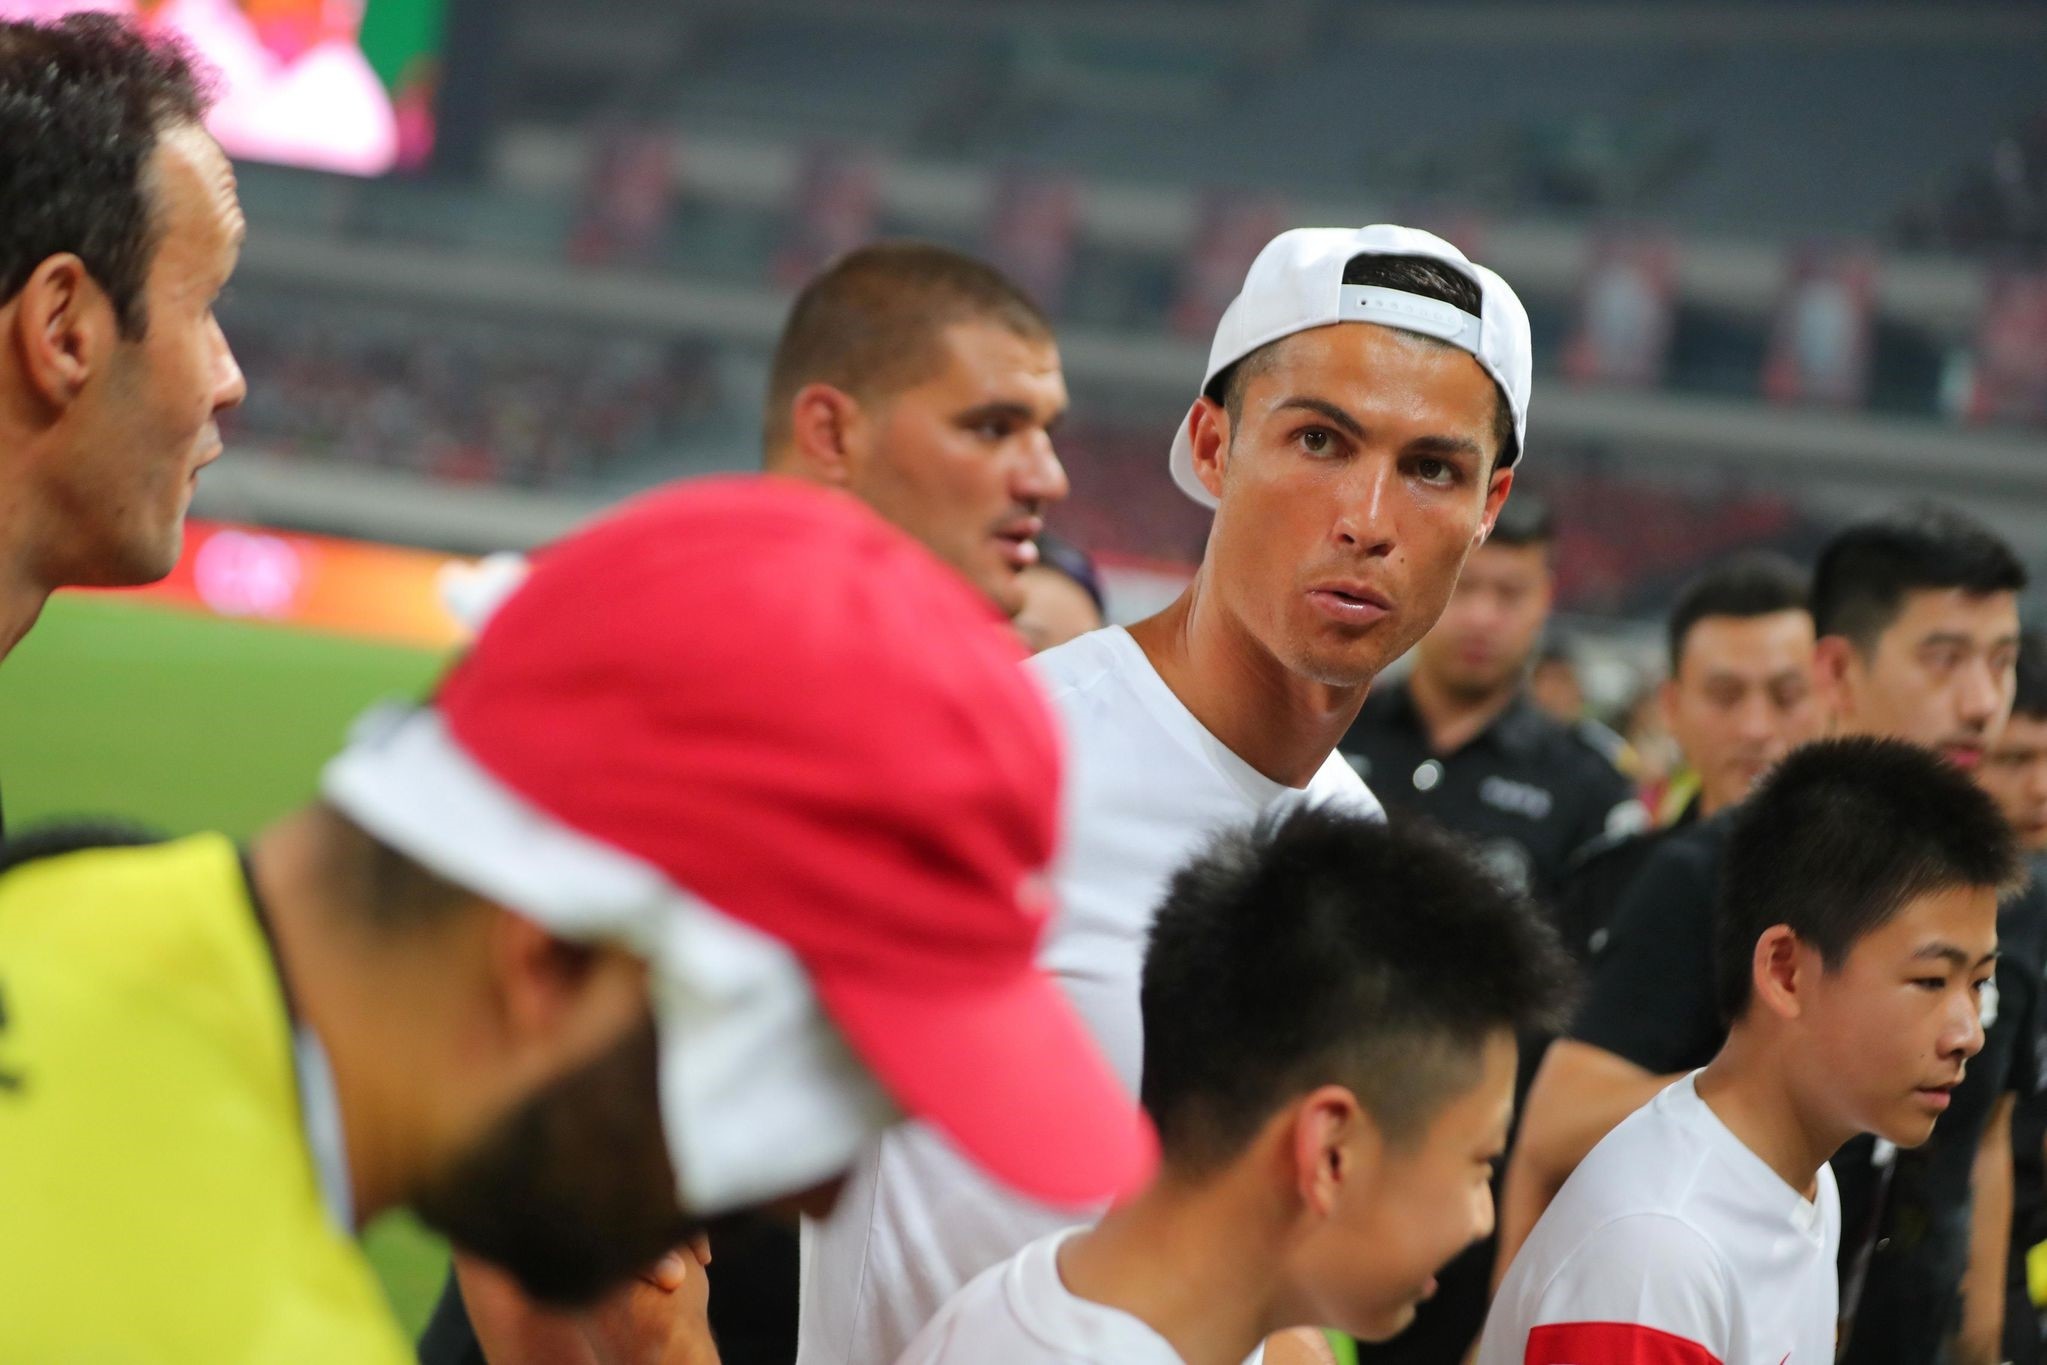 Real Madrid player Christiano Ronaldo attends an event as part of his individual promotional tour of China, in Shanghai on July 22, 2017. (AFP PHOTO)